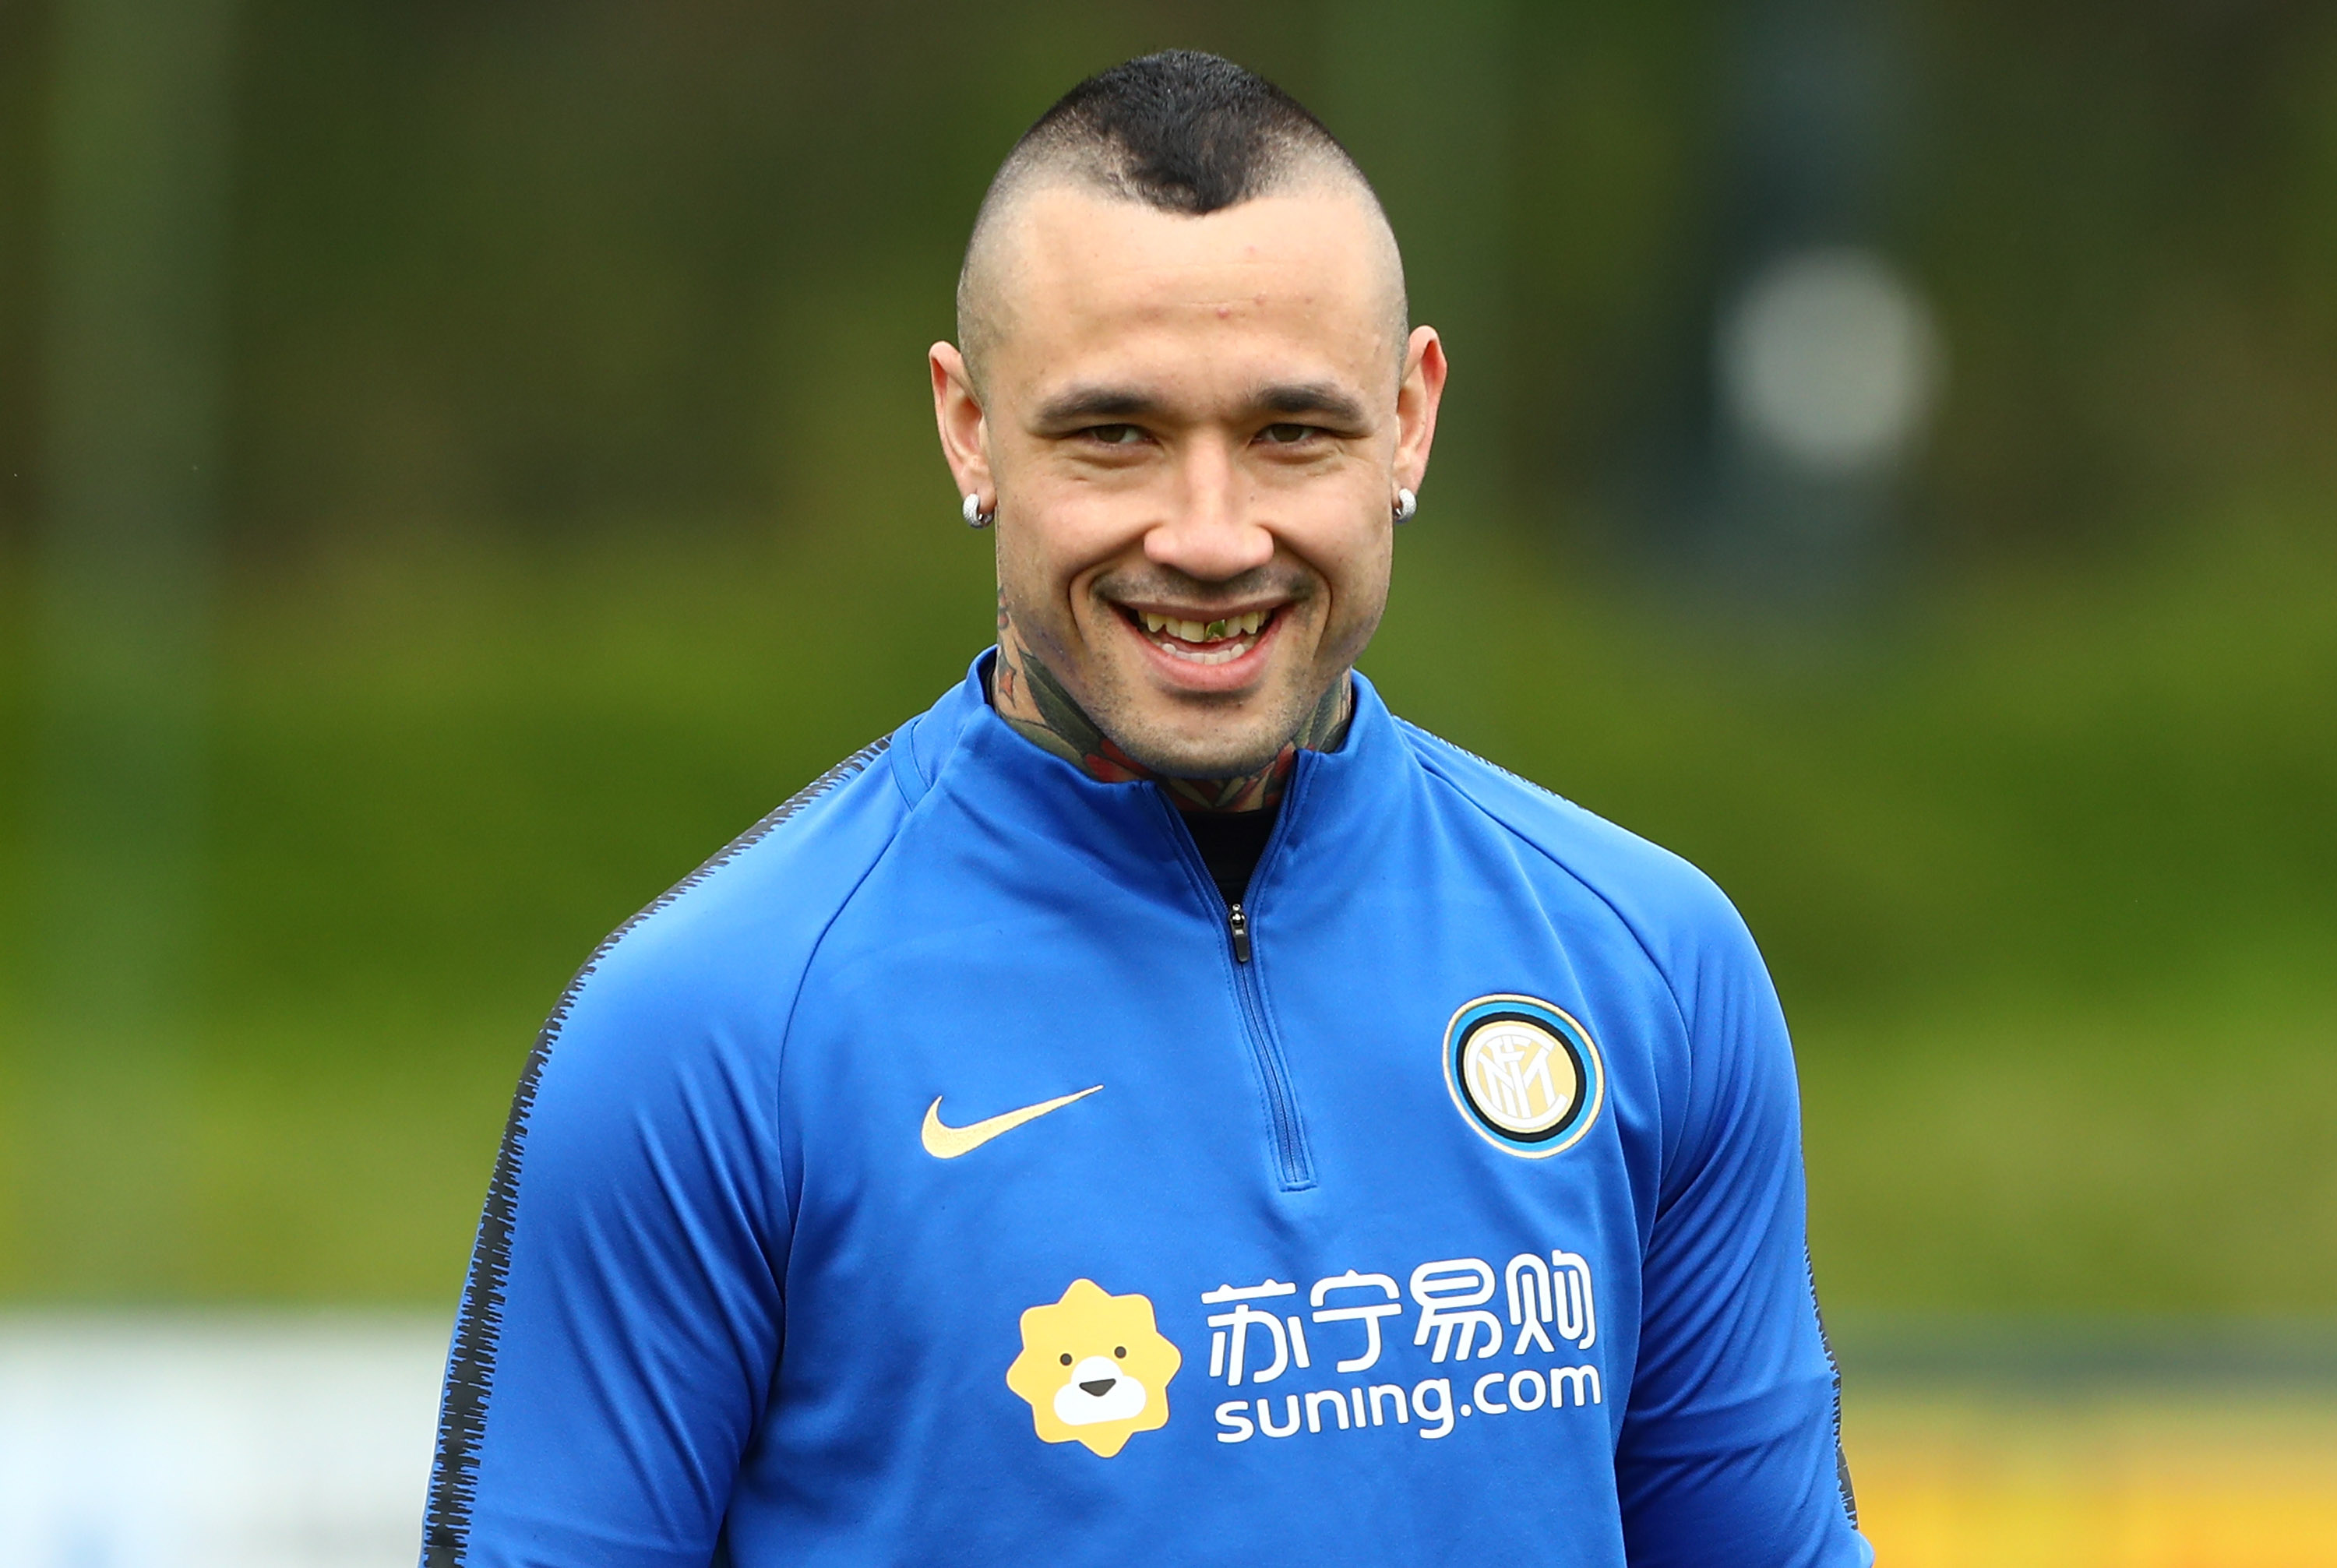 COMO, ITALY - APRIL 12:  Radja Nainggolan of FC Internazionale looks on during the FC Internazionale training session at the club's training ground Suning Training Center in memory of Angelo Moratti on April 12, 2019 in Como, Italy.  (Photo by Marco Luzzani - Inter/Inter via Getty Images)